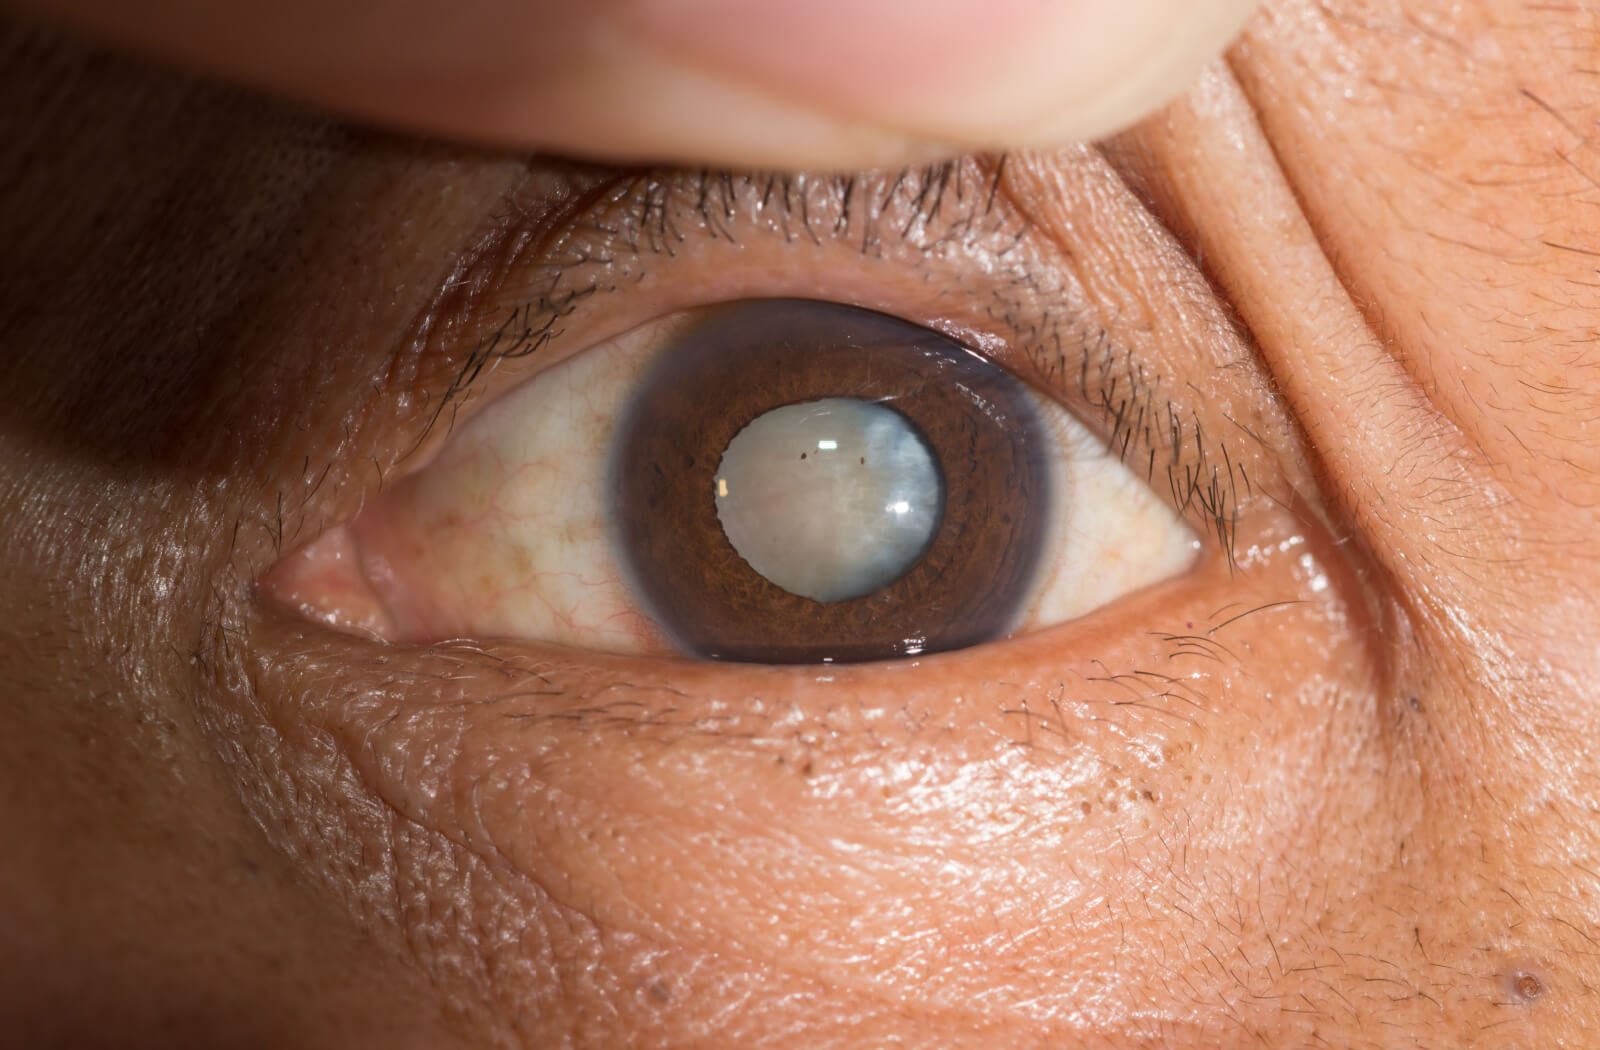 An intense close-up of an eye with cataracts.